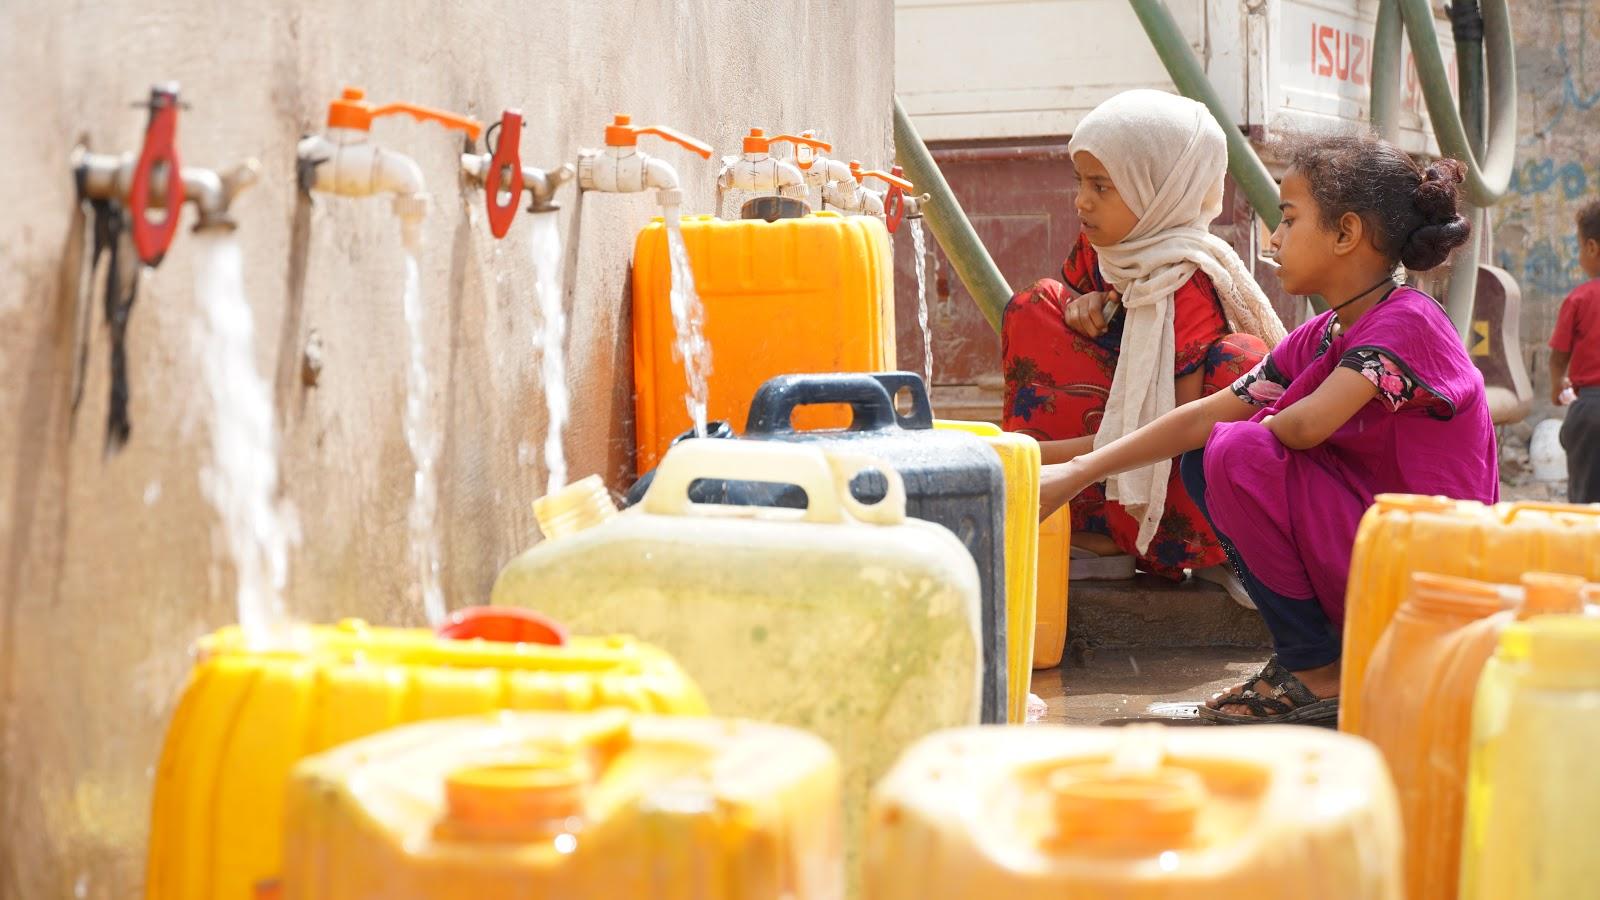 Two girls fill jerry cans at a water collection point built with USAID funding in the Jabal Habashy District of Ta’izz Governorate in Yemen. USAID funds construction and rehabilitation of water collection points closer to communities in Yemen. Photo Credit: CARE International